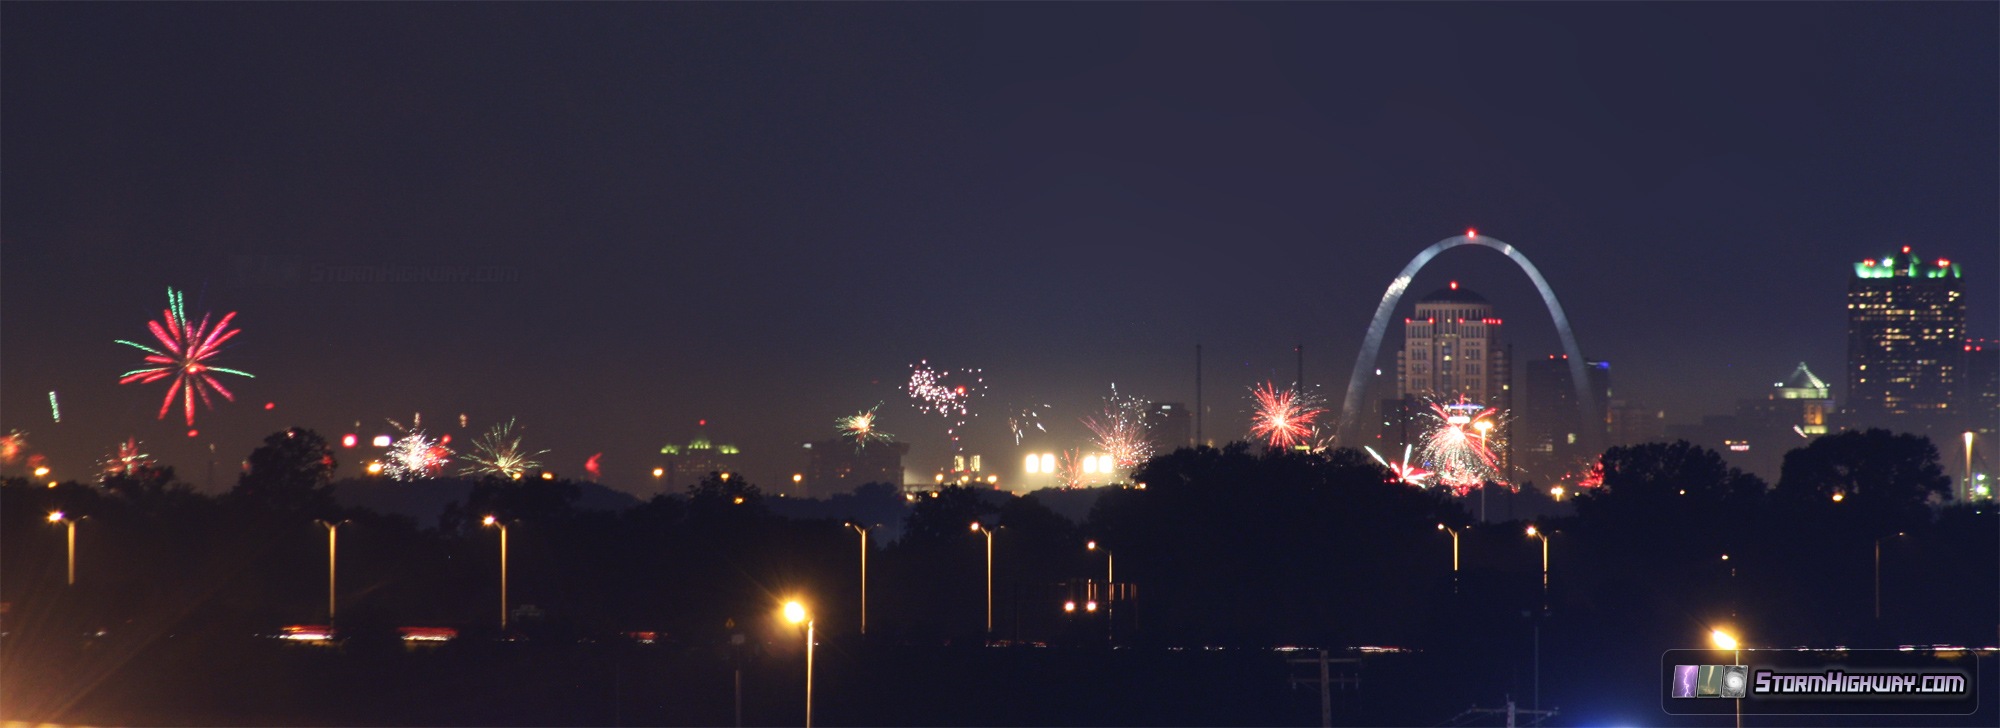 East St. Louis fireworks with Arch - July 4, 2014